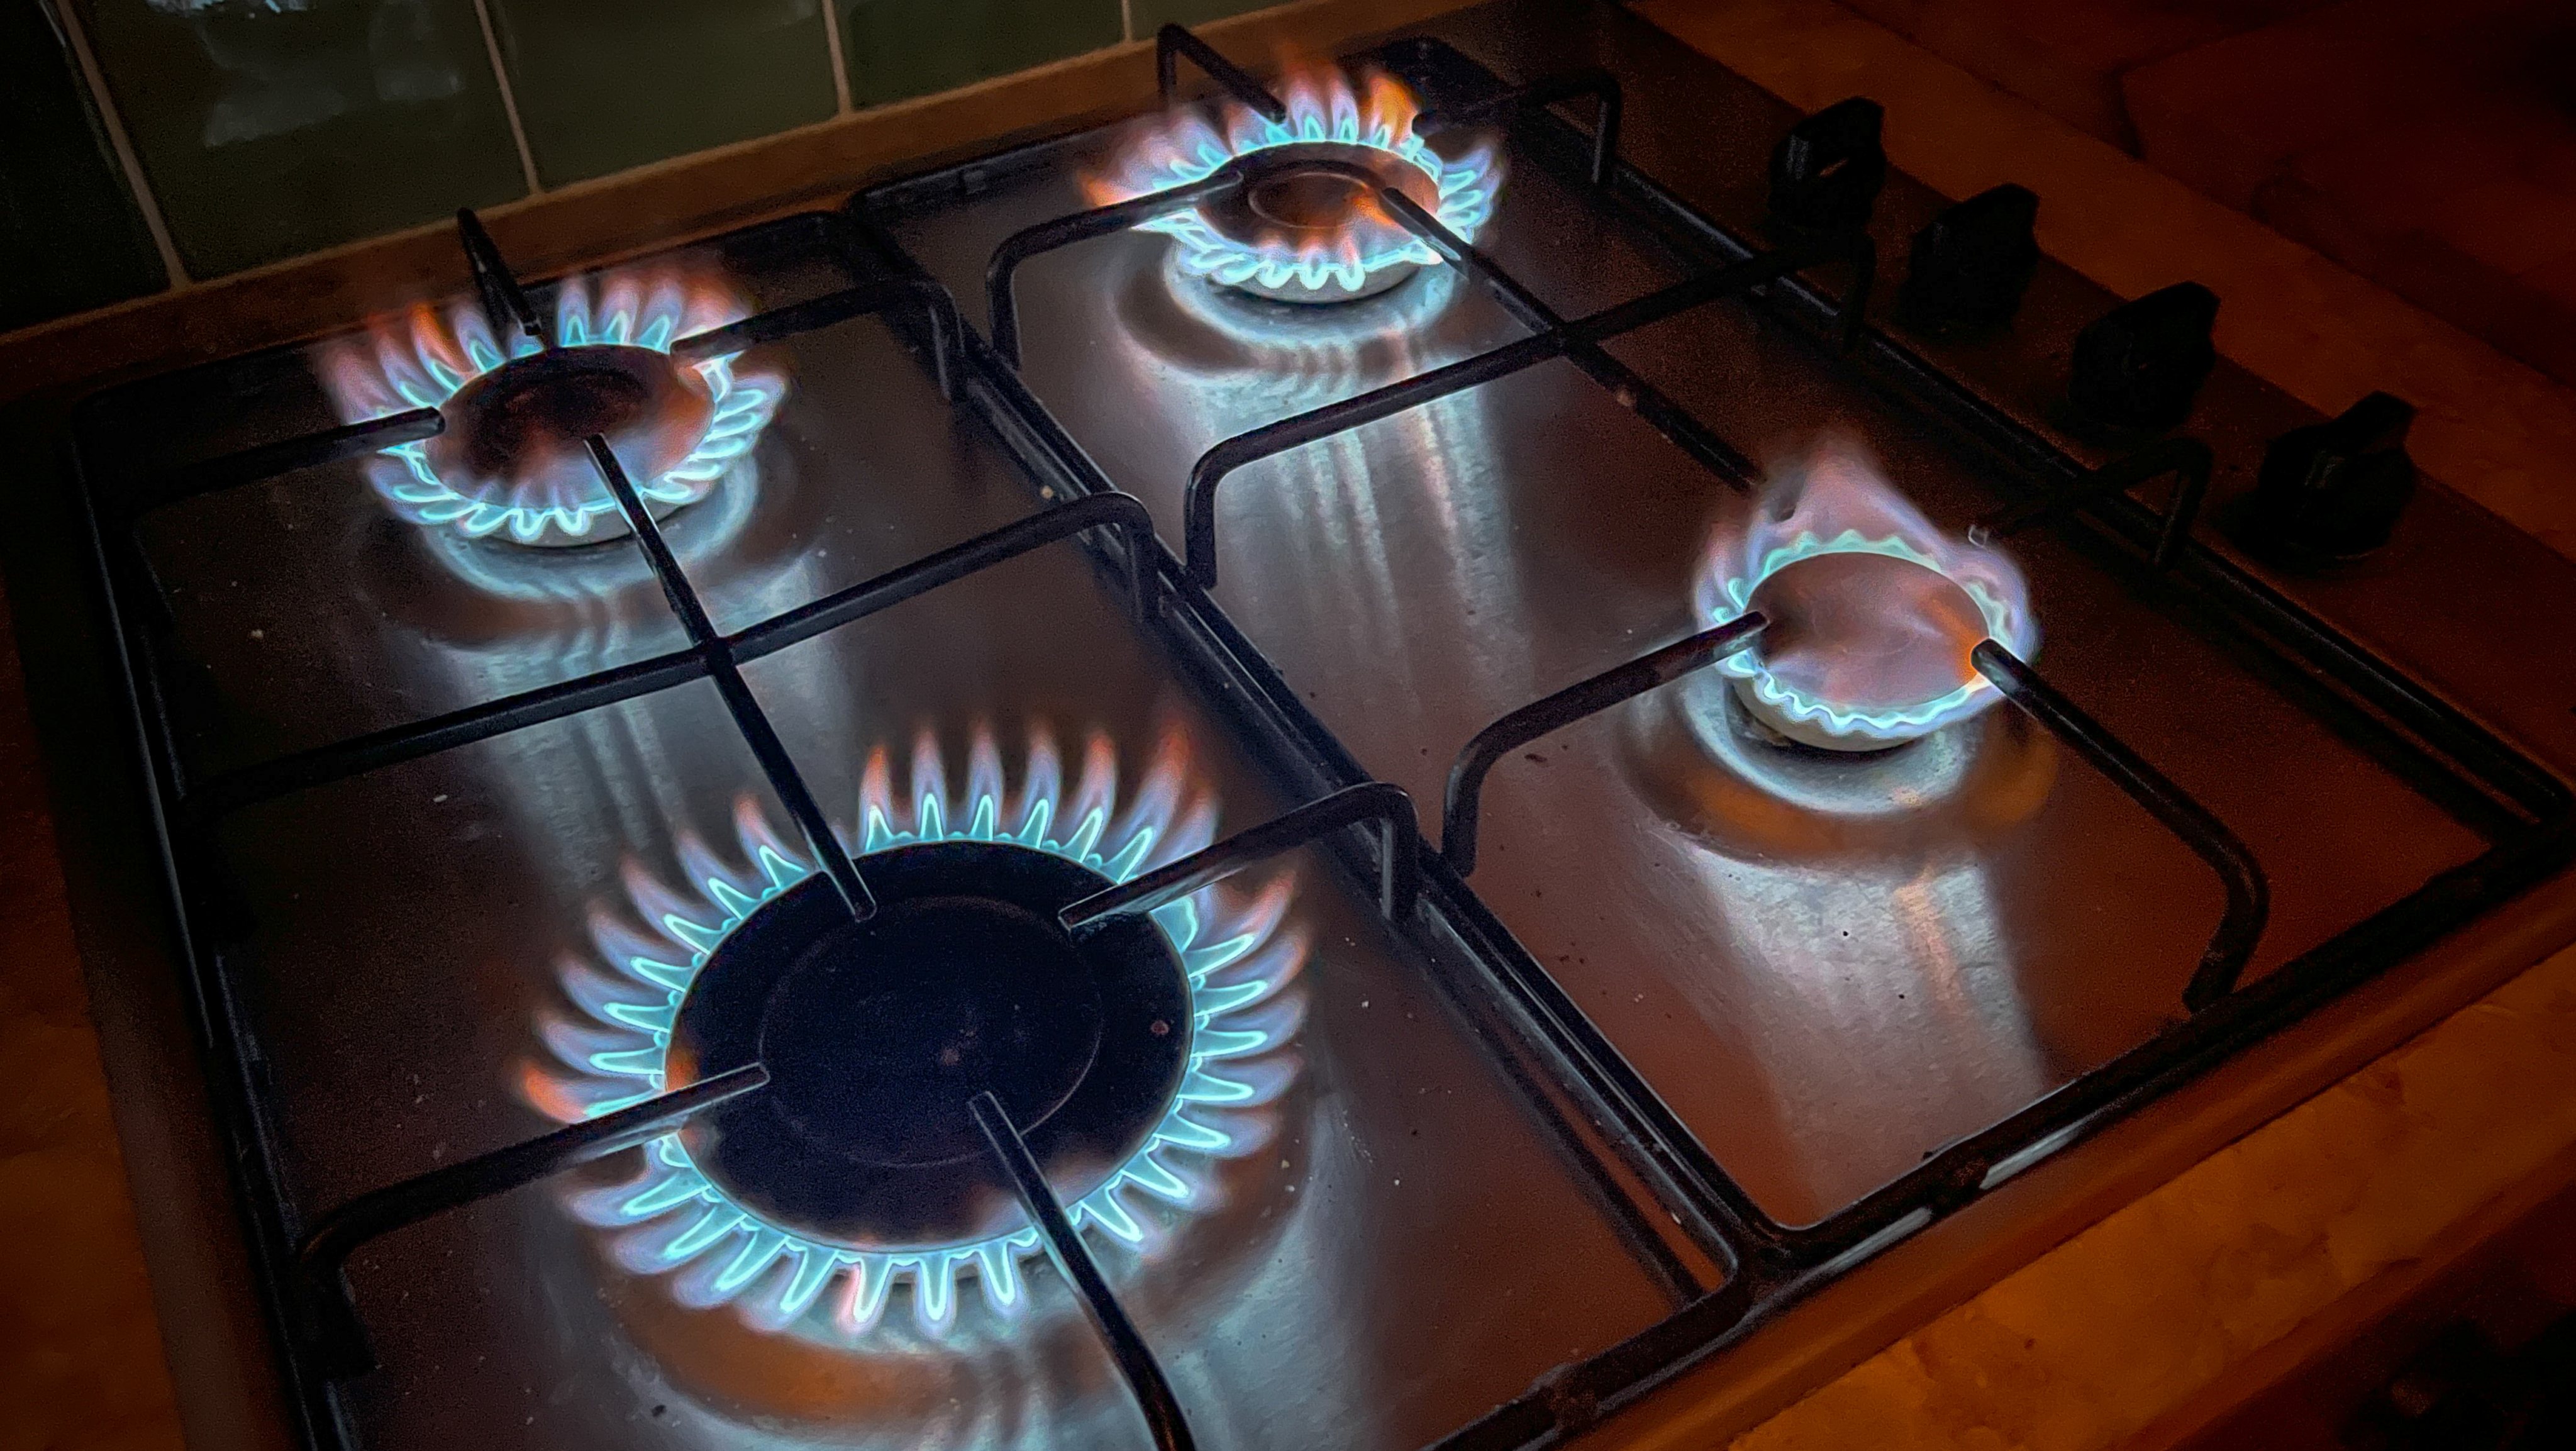 Warnings That UK Energy Bills Could Rise Sharply In The New Year